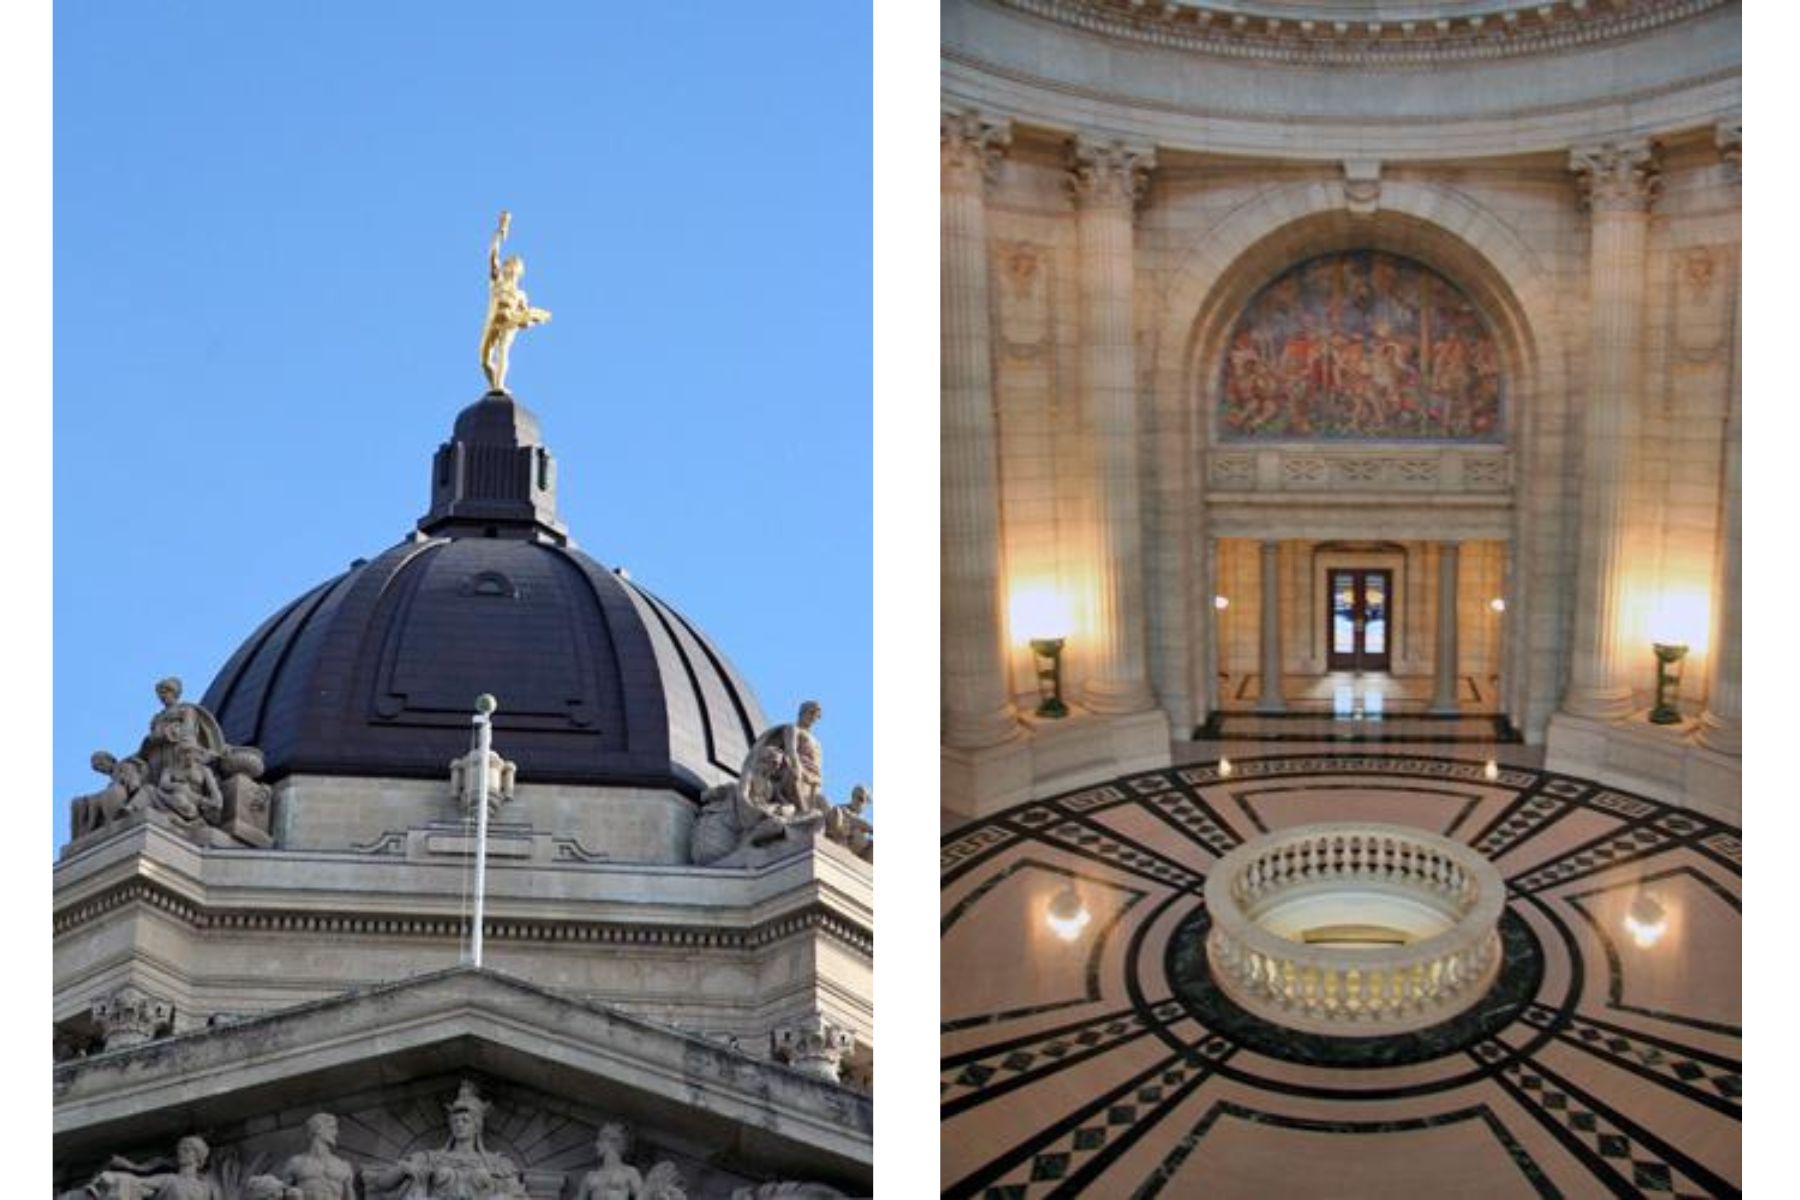 On the left is a photo of the Golden Boy on top of the Manitoba Legislative Building, and on the right is a photo of the interior of the Manitoba Legislative Building.